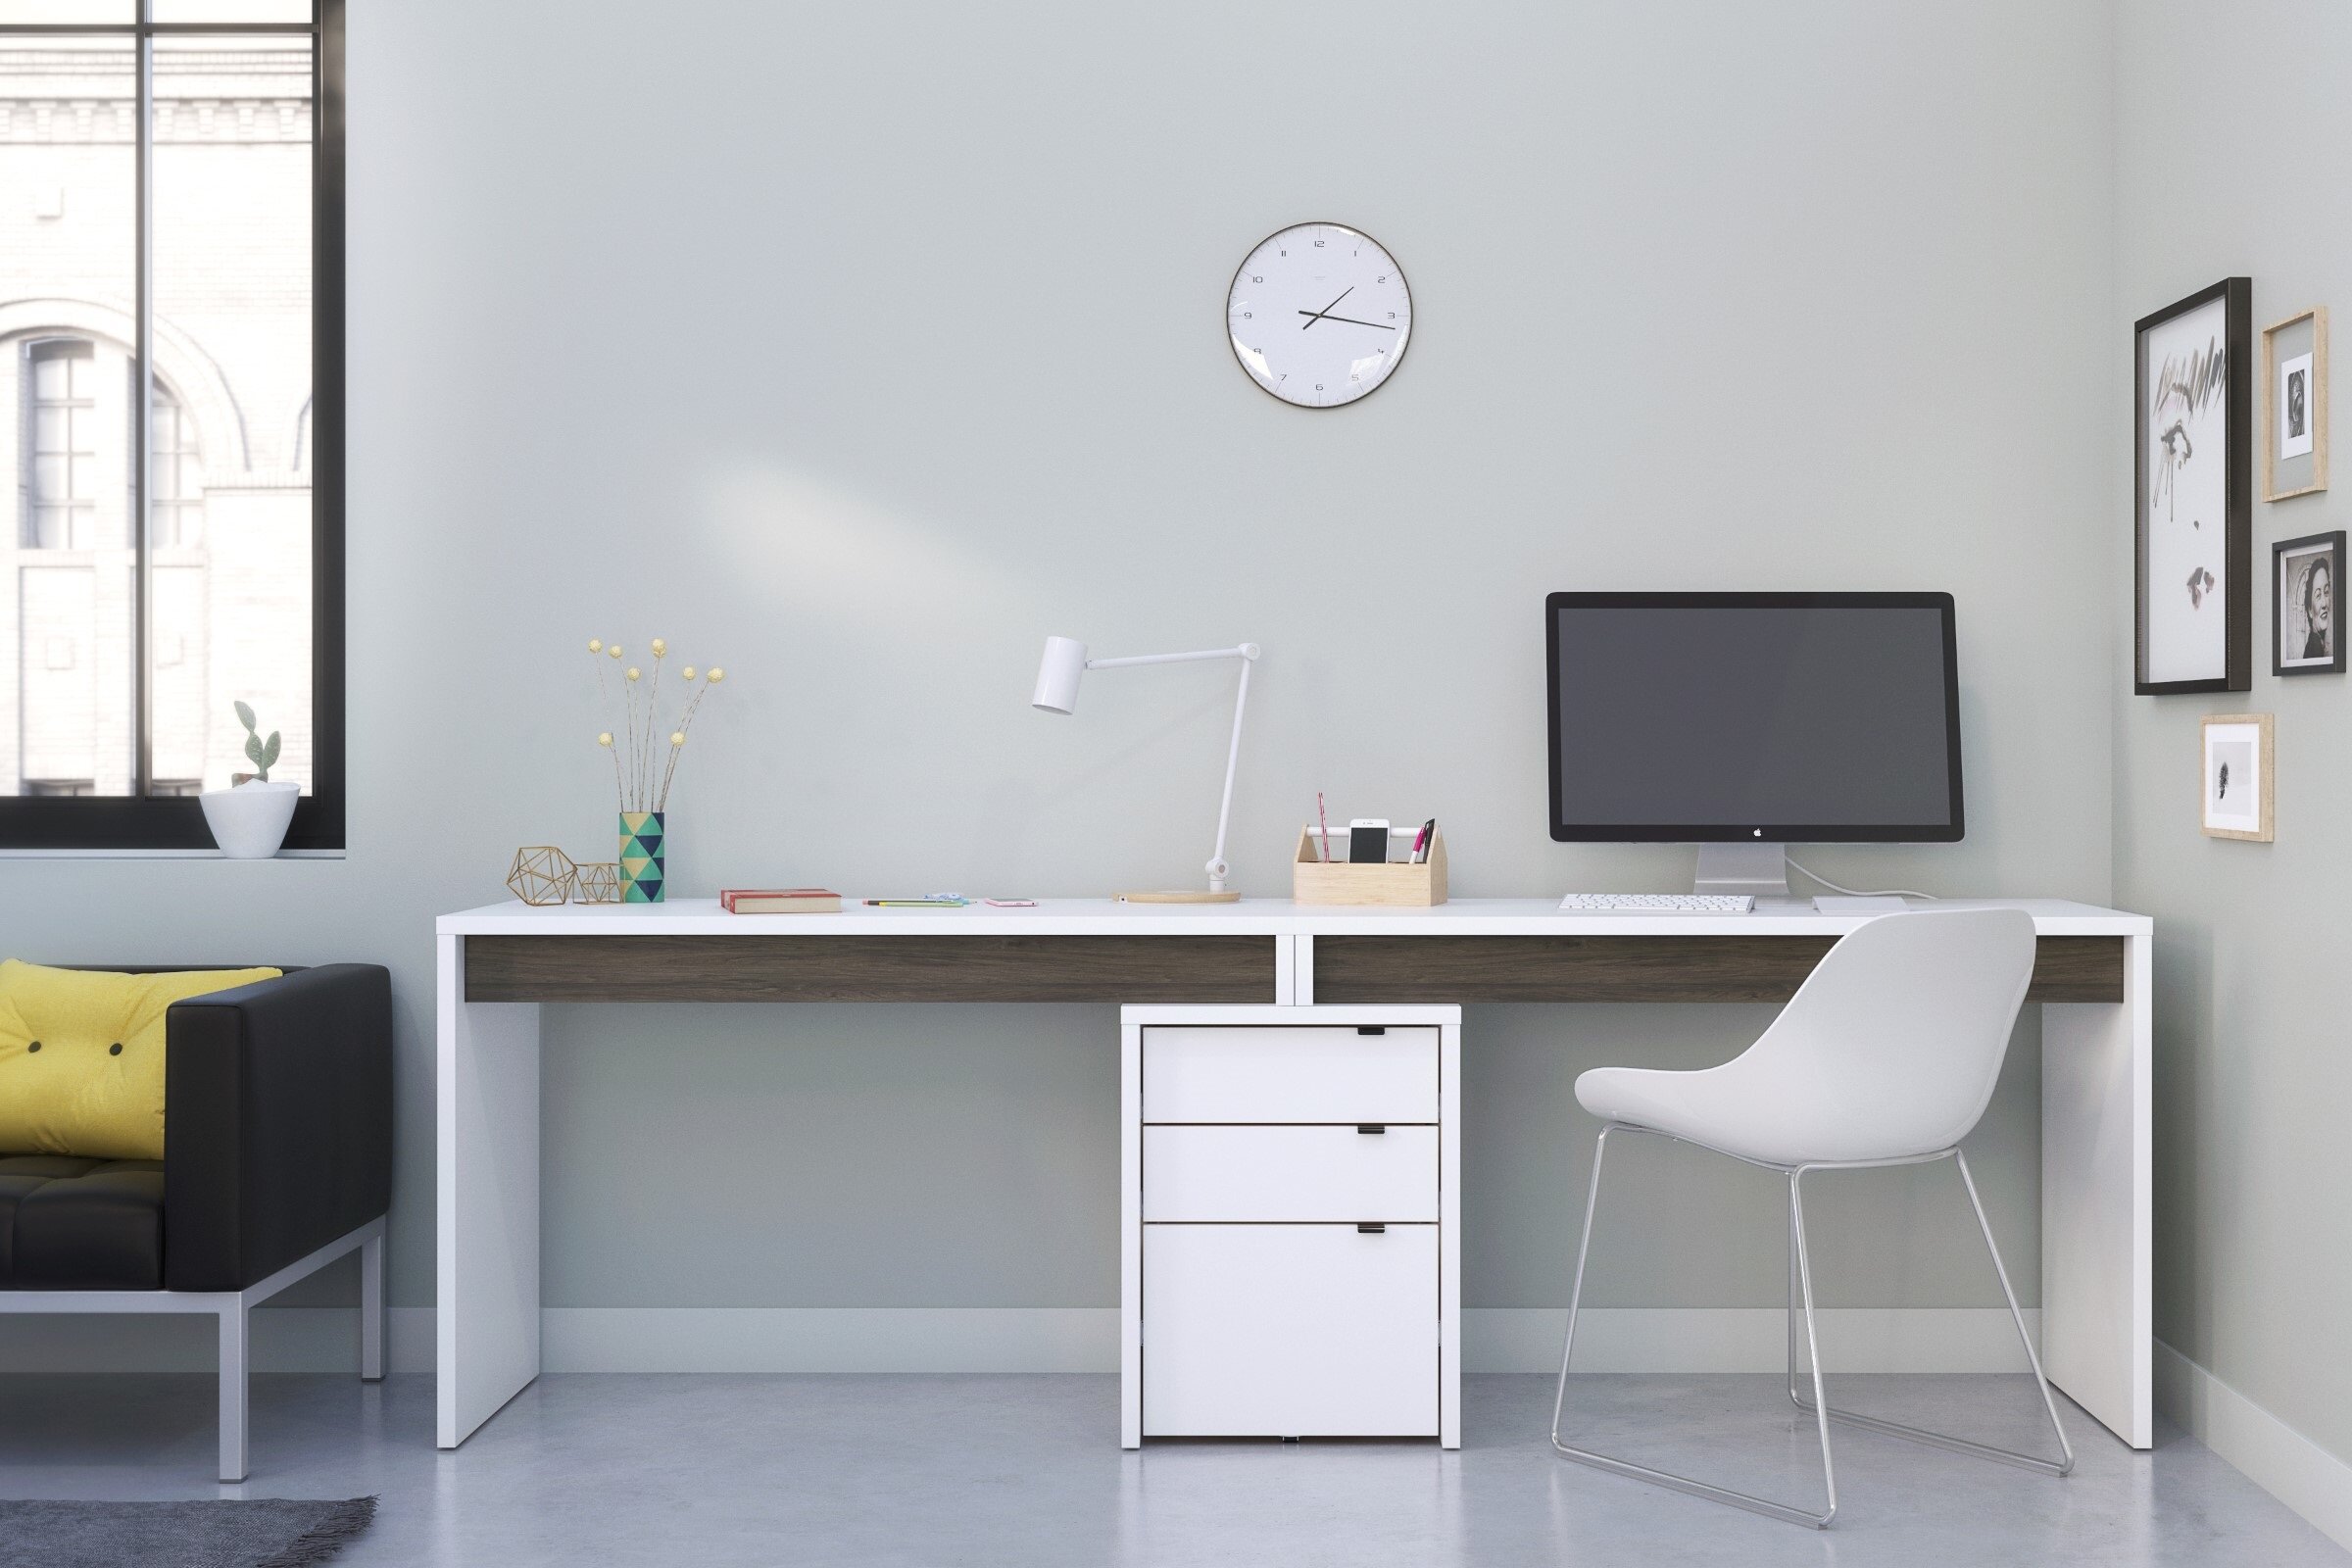 IFANNY White Computer Desk with Drawers, Modern Office Desk with